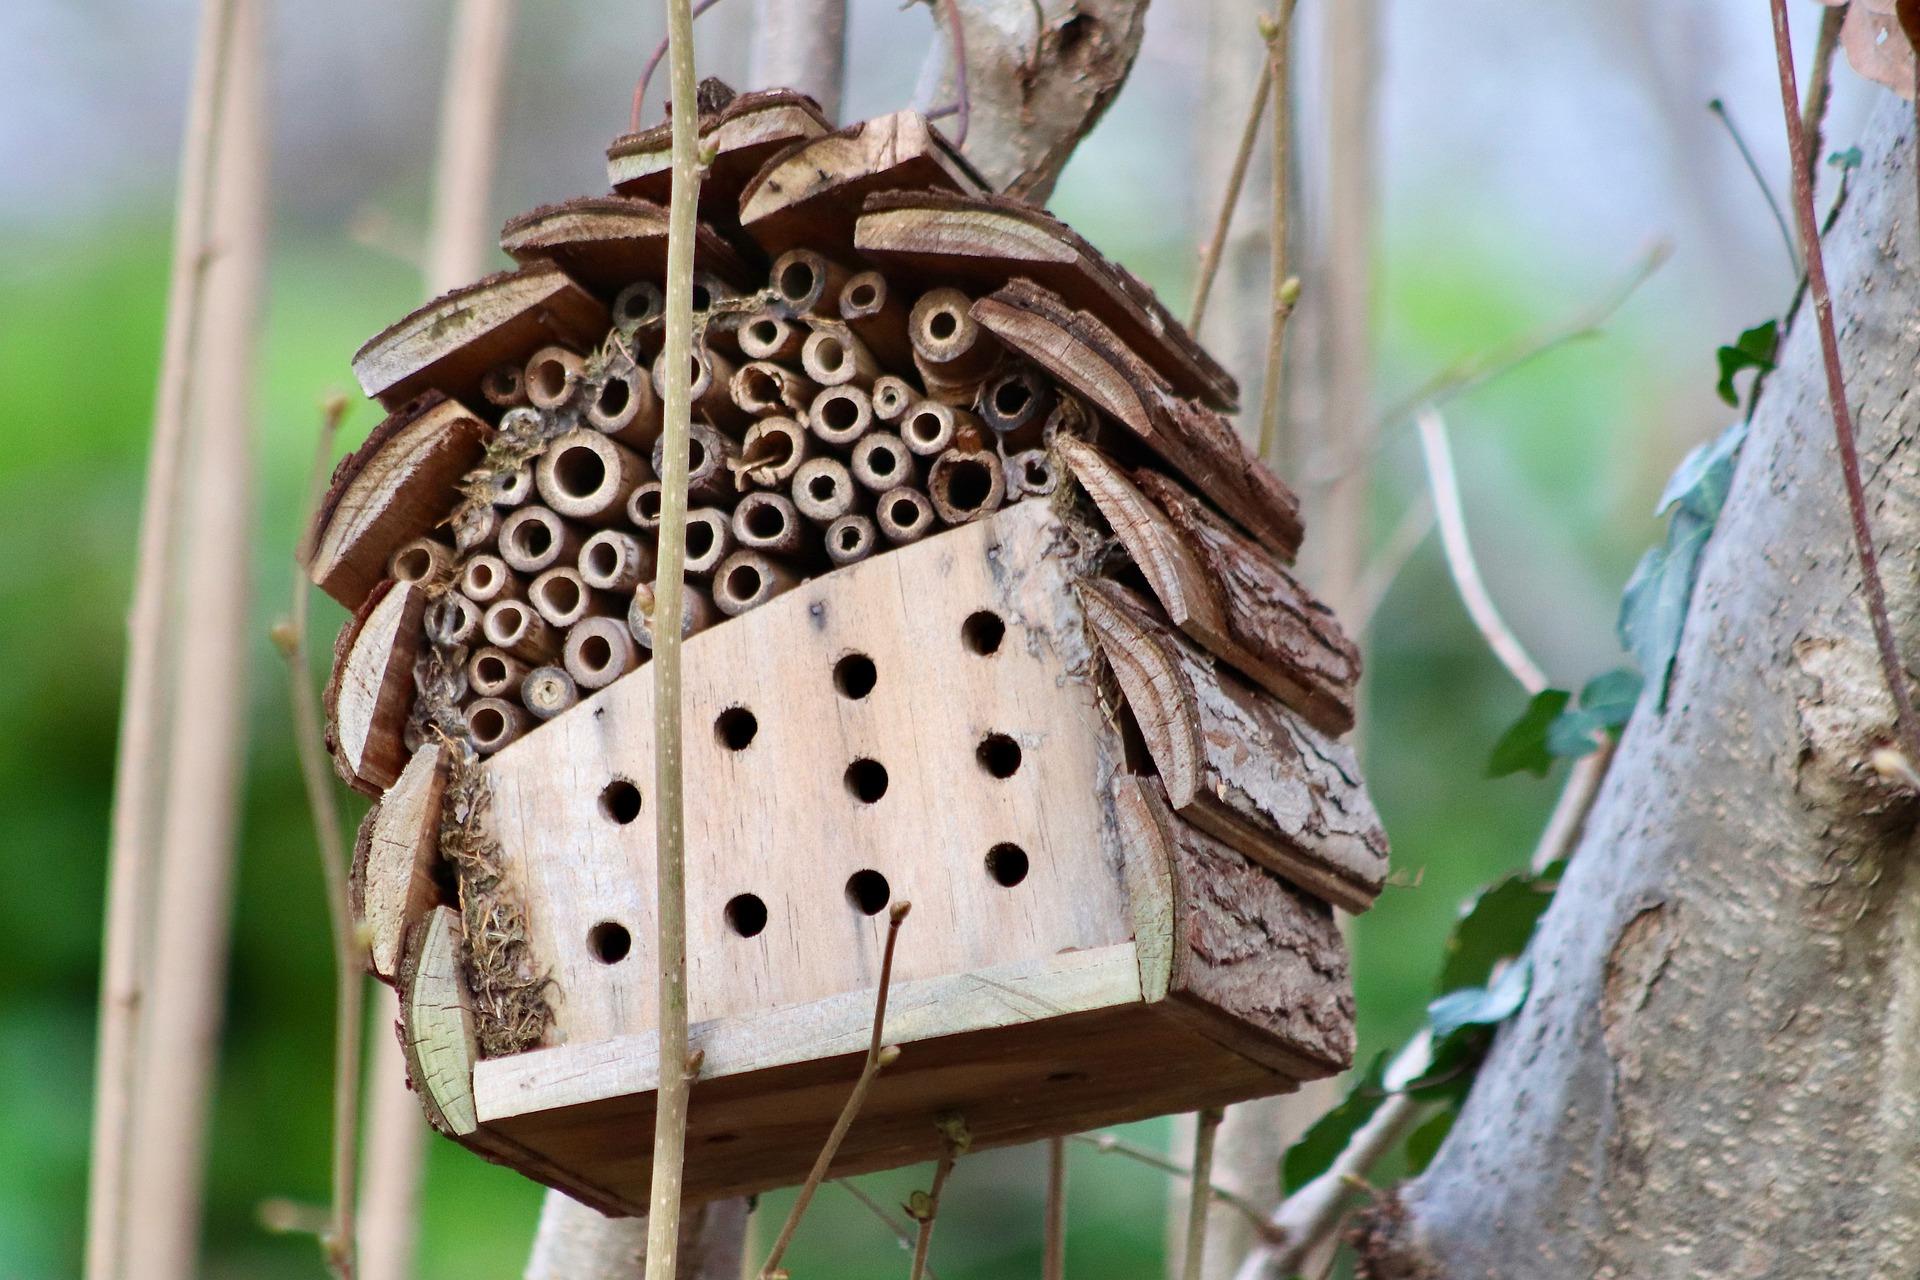 Insect hotel 7753737 1920